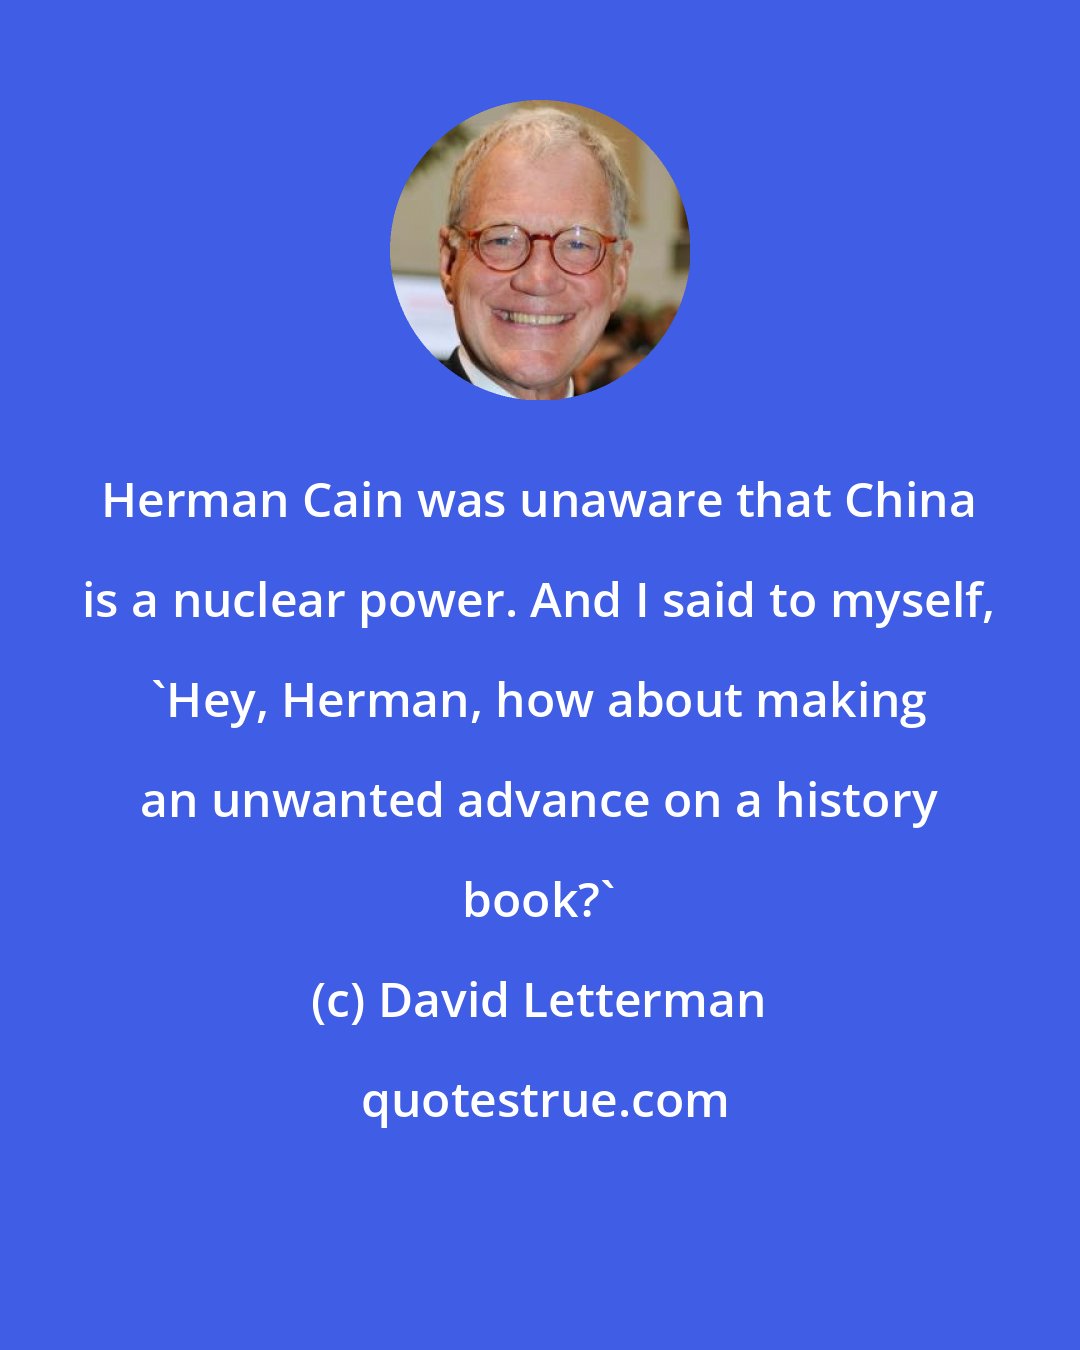 David Letterman: Herman Cain was unaware that China is a nuclear power. And I said to myself, 'Hey, Herman, how about making an unwanted advance on a history book?'